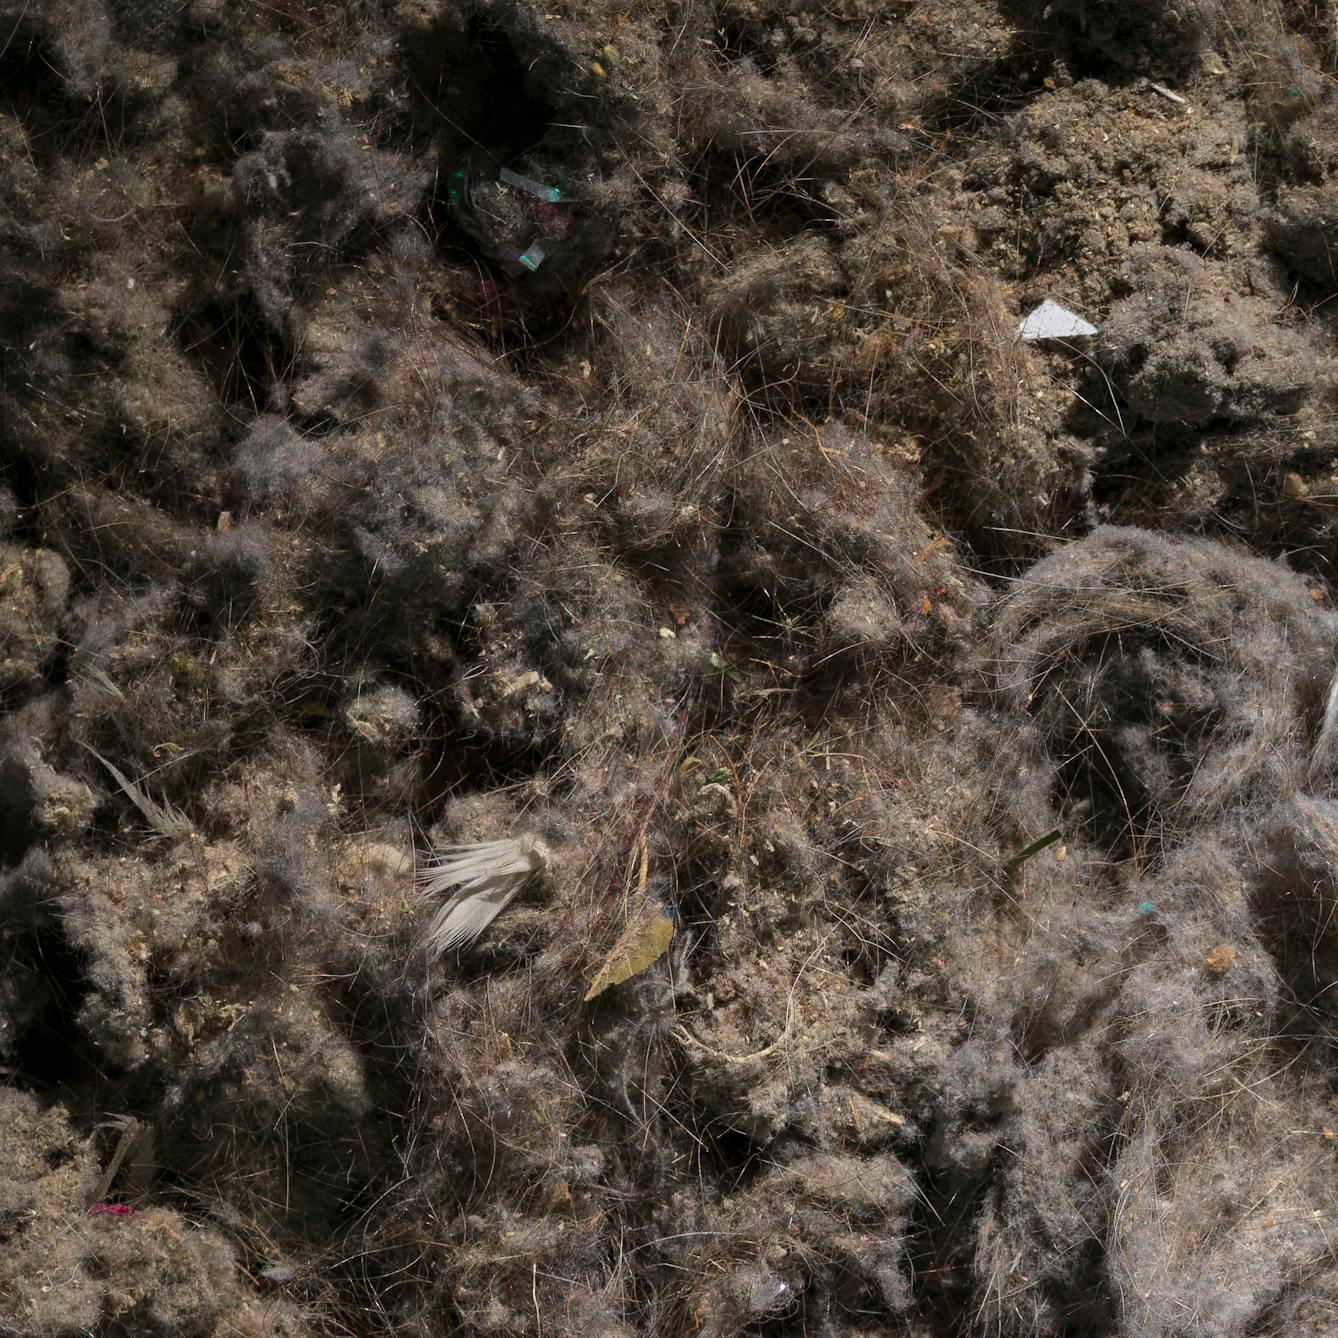 Photograph of a close up of the contents of a vacuum cleaner bag, showing dust, human hairs and other pieces of dirt.